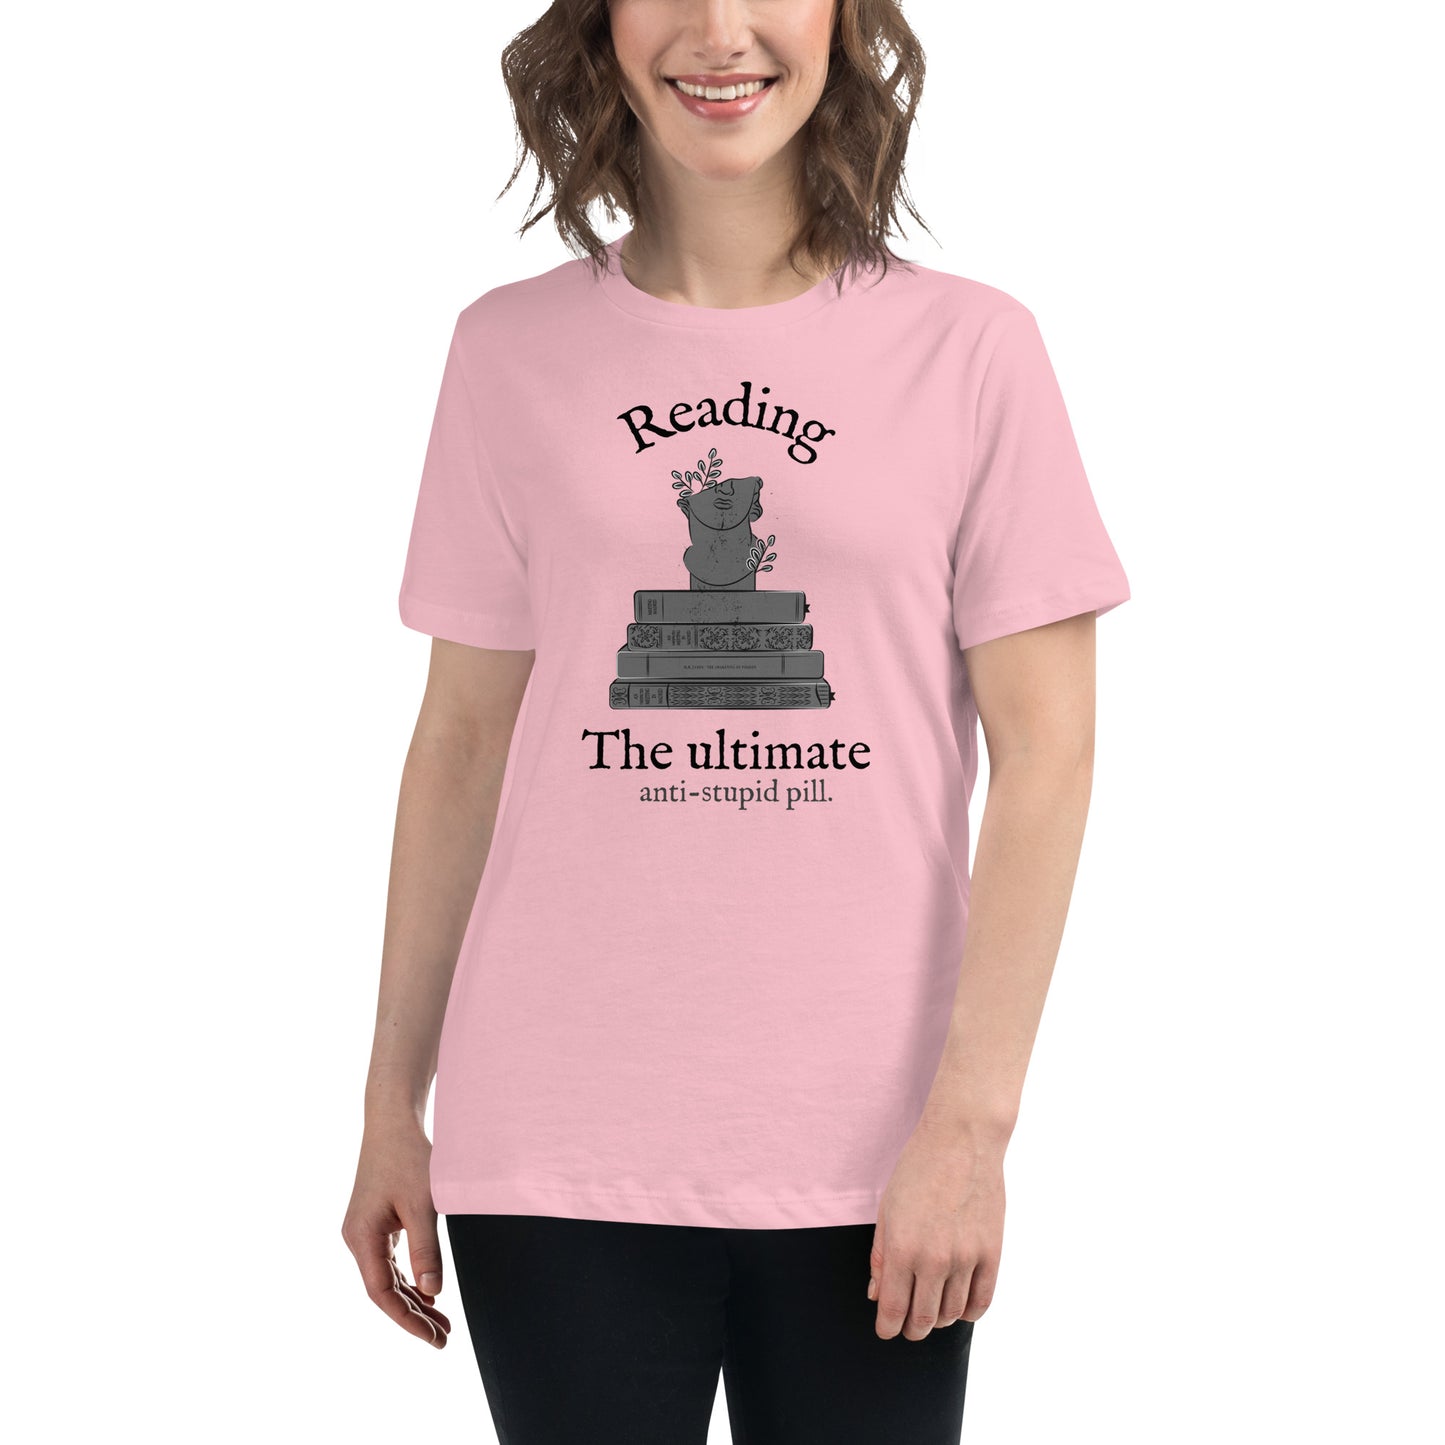 The ultimate anti-stupid pill Women's Relaxed T-Shirt